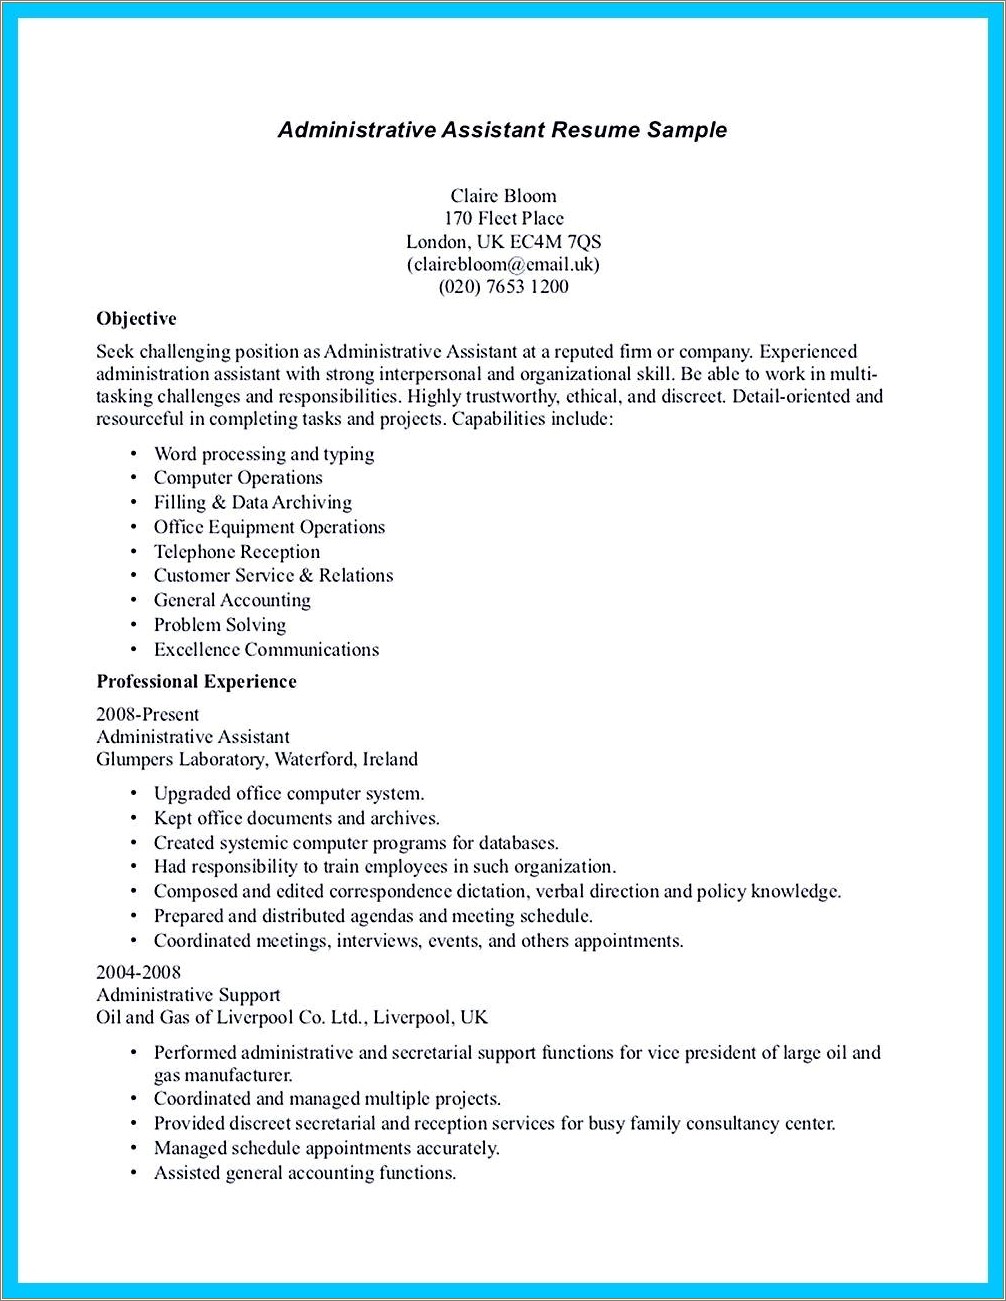 Data Entry Administrative Assistant Resume With Little Experience